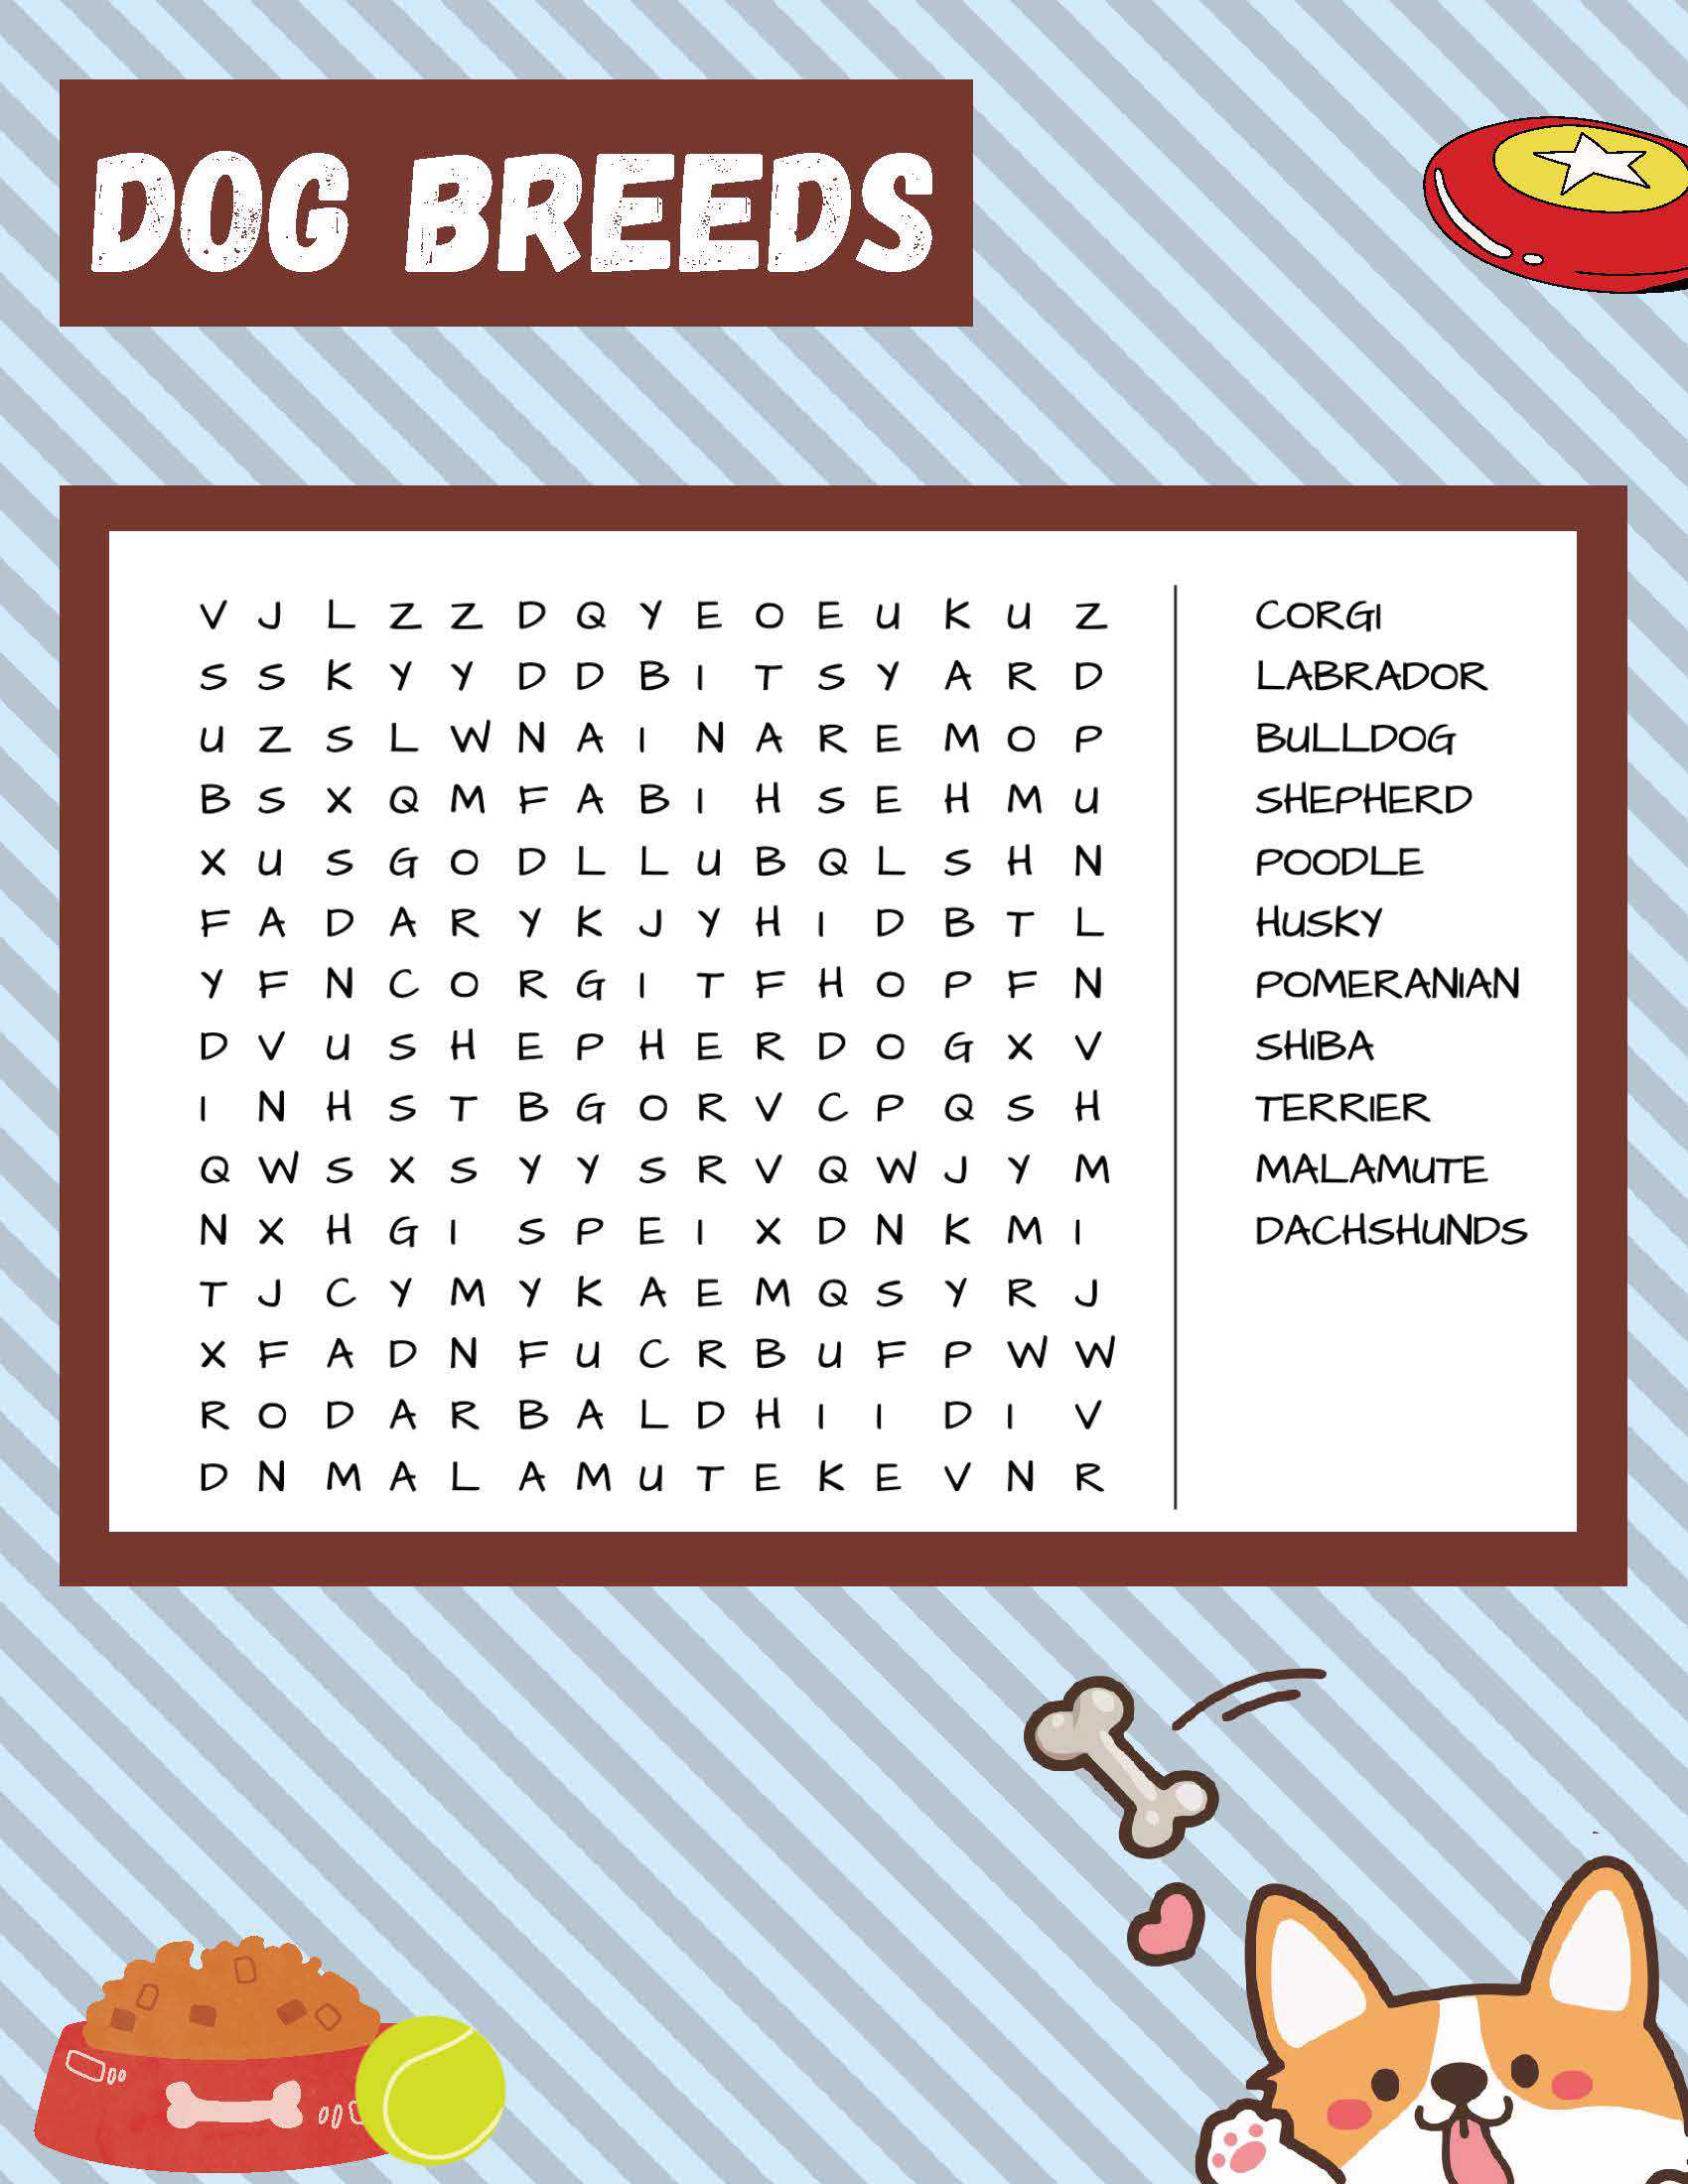 Link to download Dog Breeds word search.